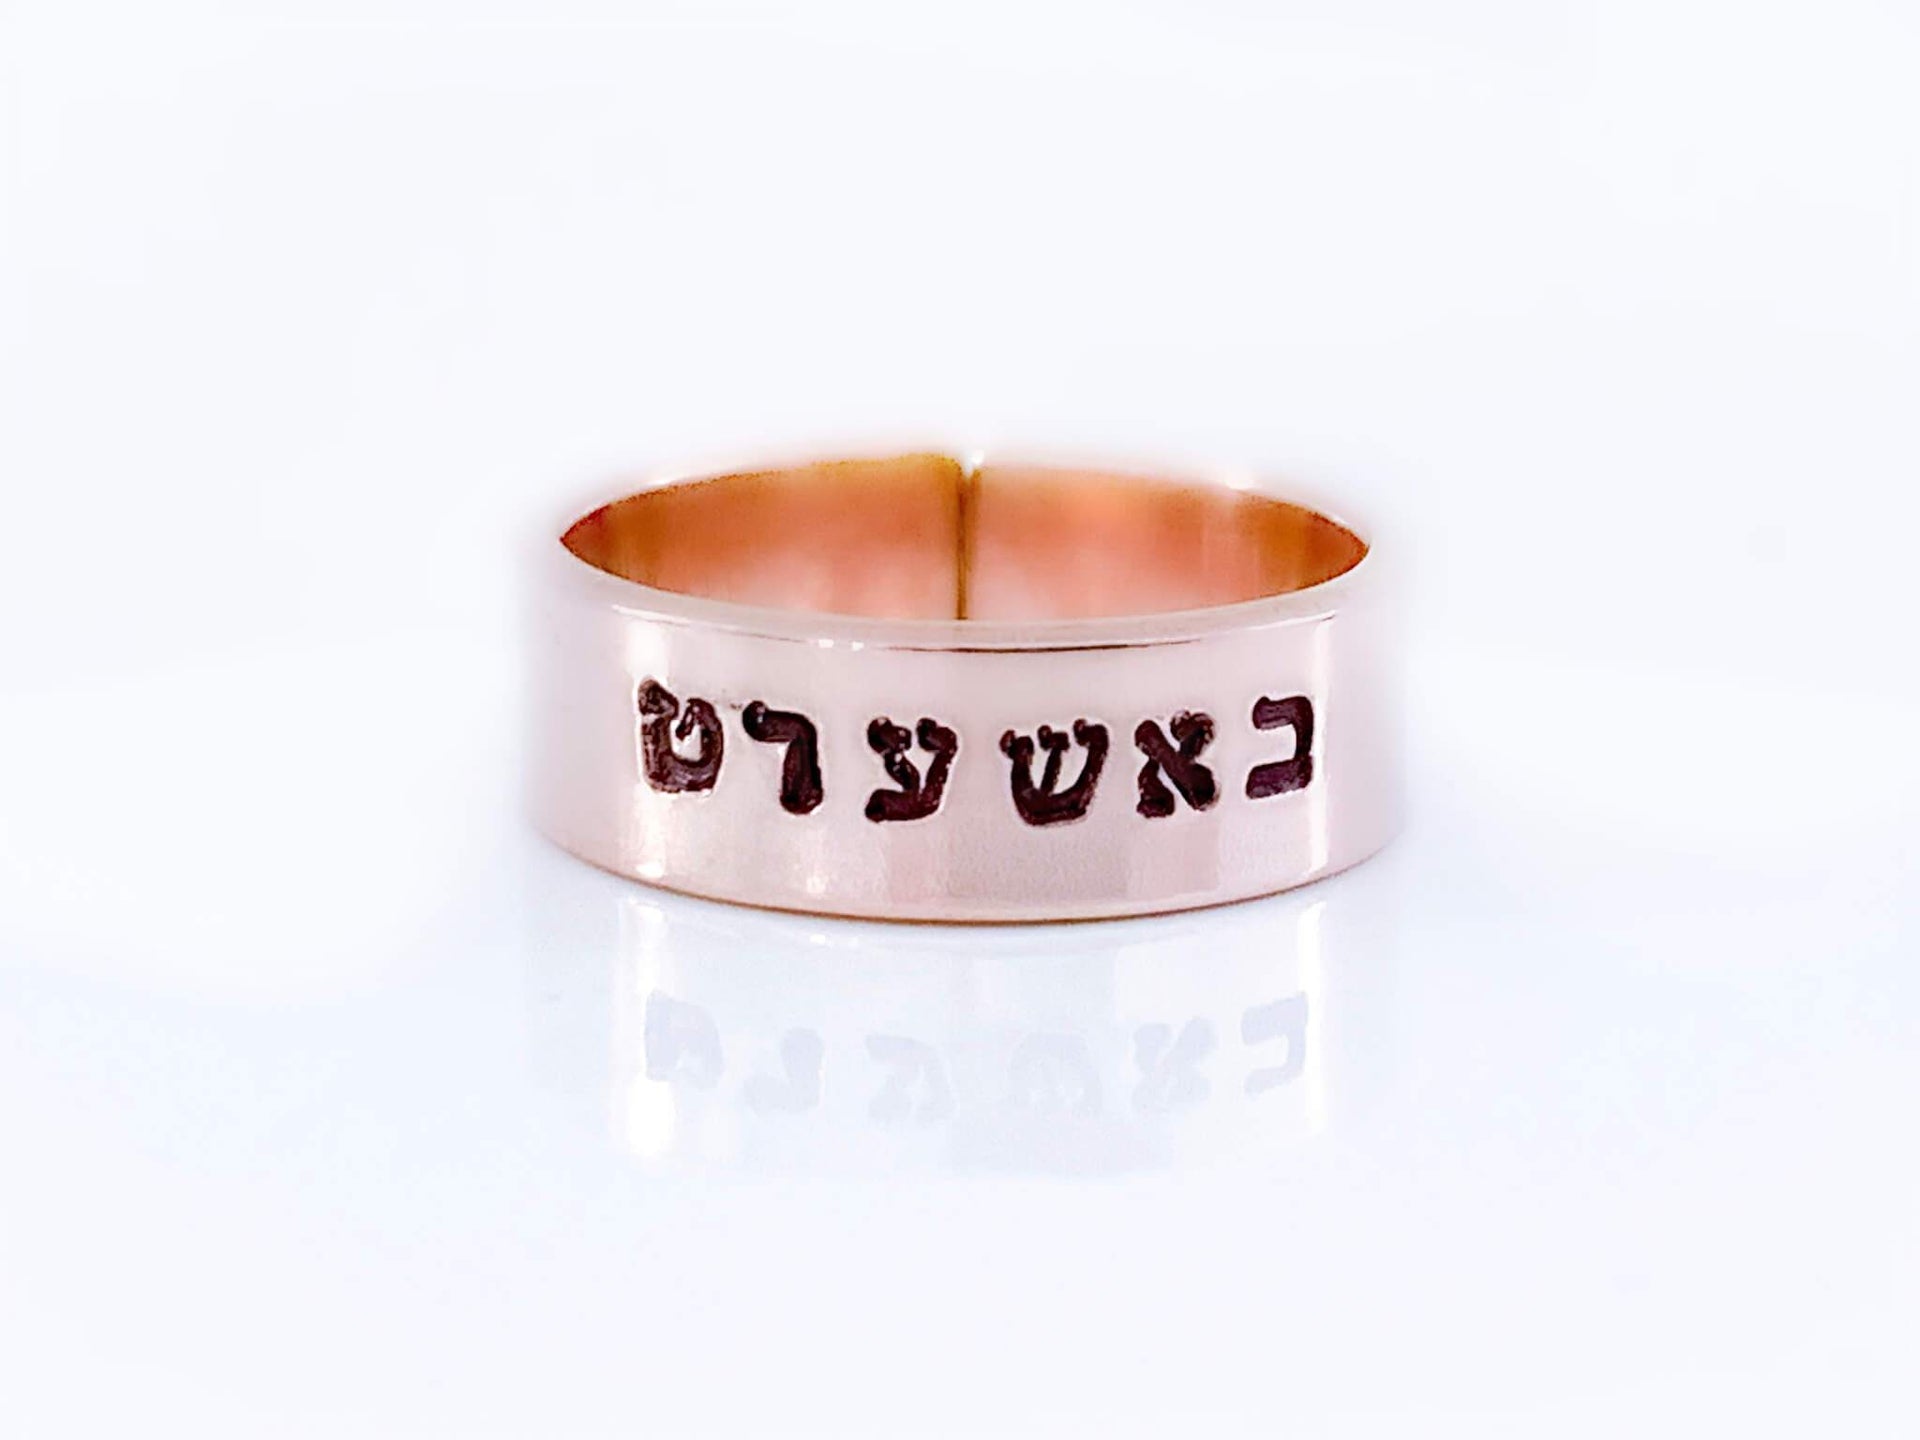 Everything Beautiful Rings Rose Gold-Filled Bashert Adjustable Ring - Gold, Rose Gold or Sterling Silver